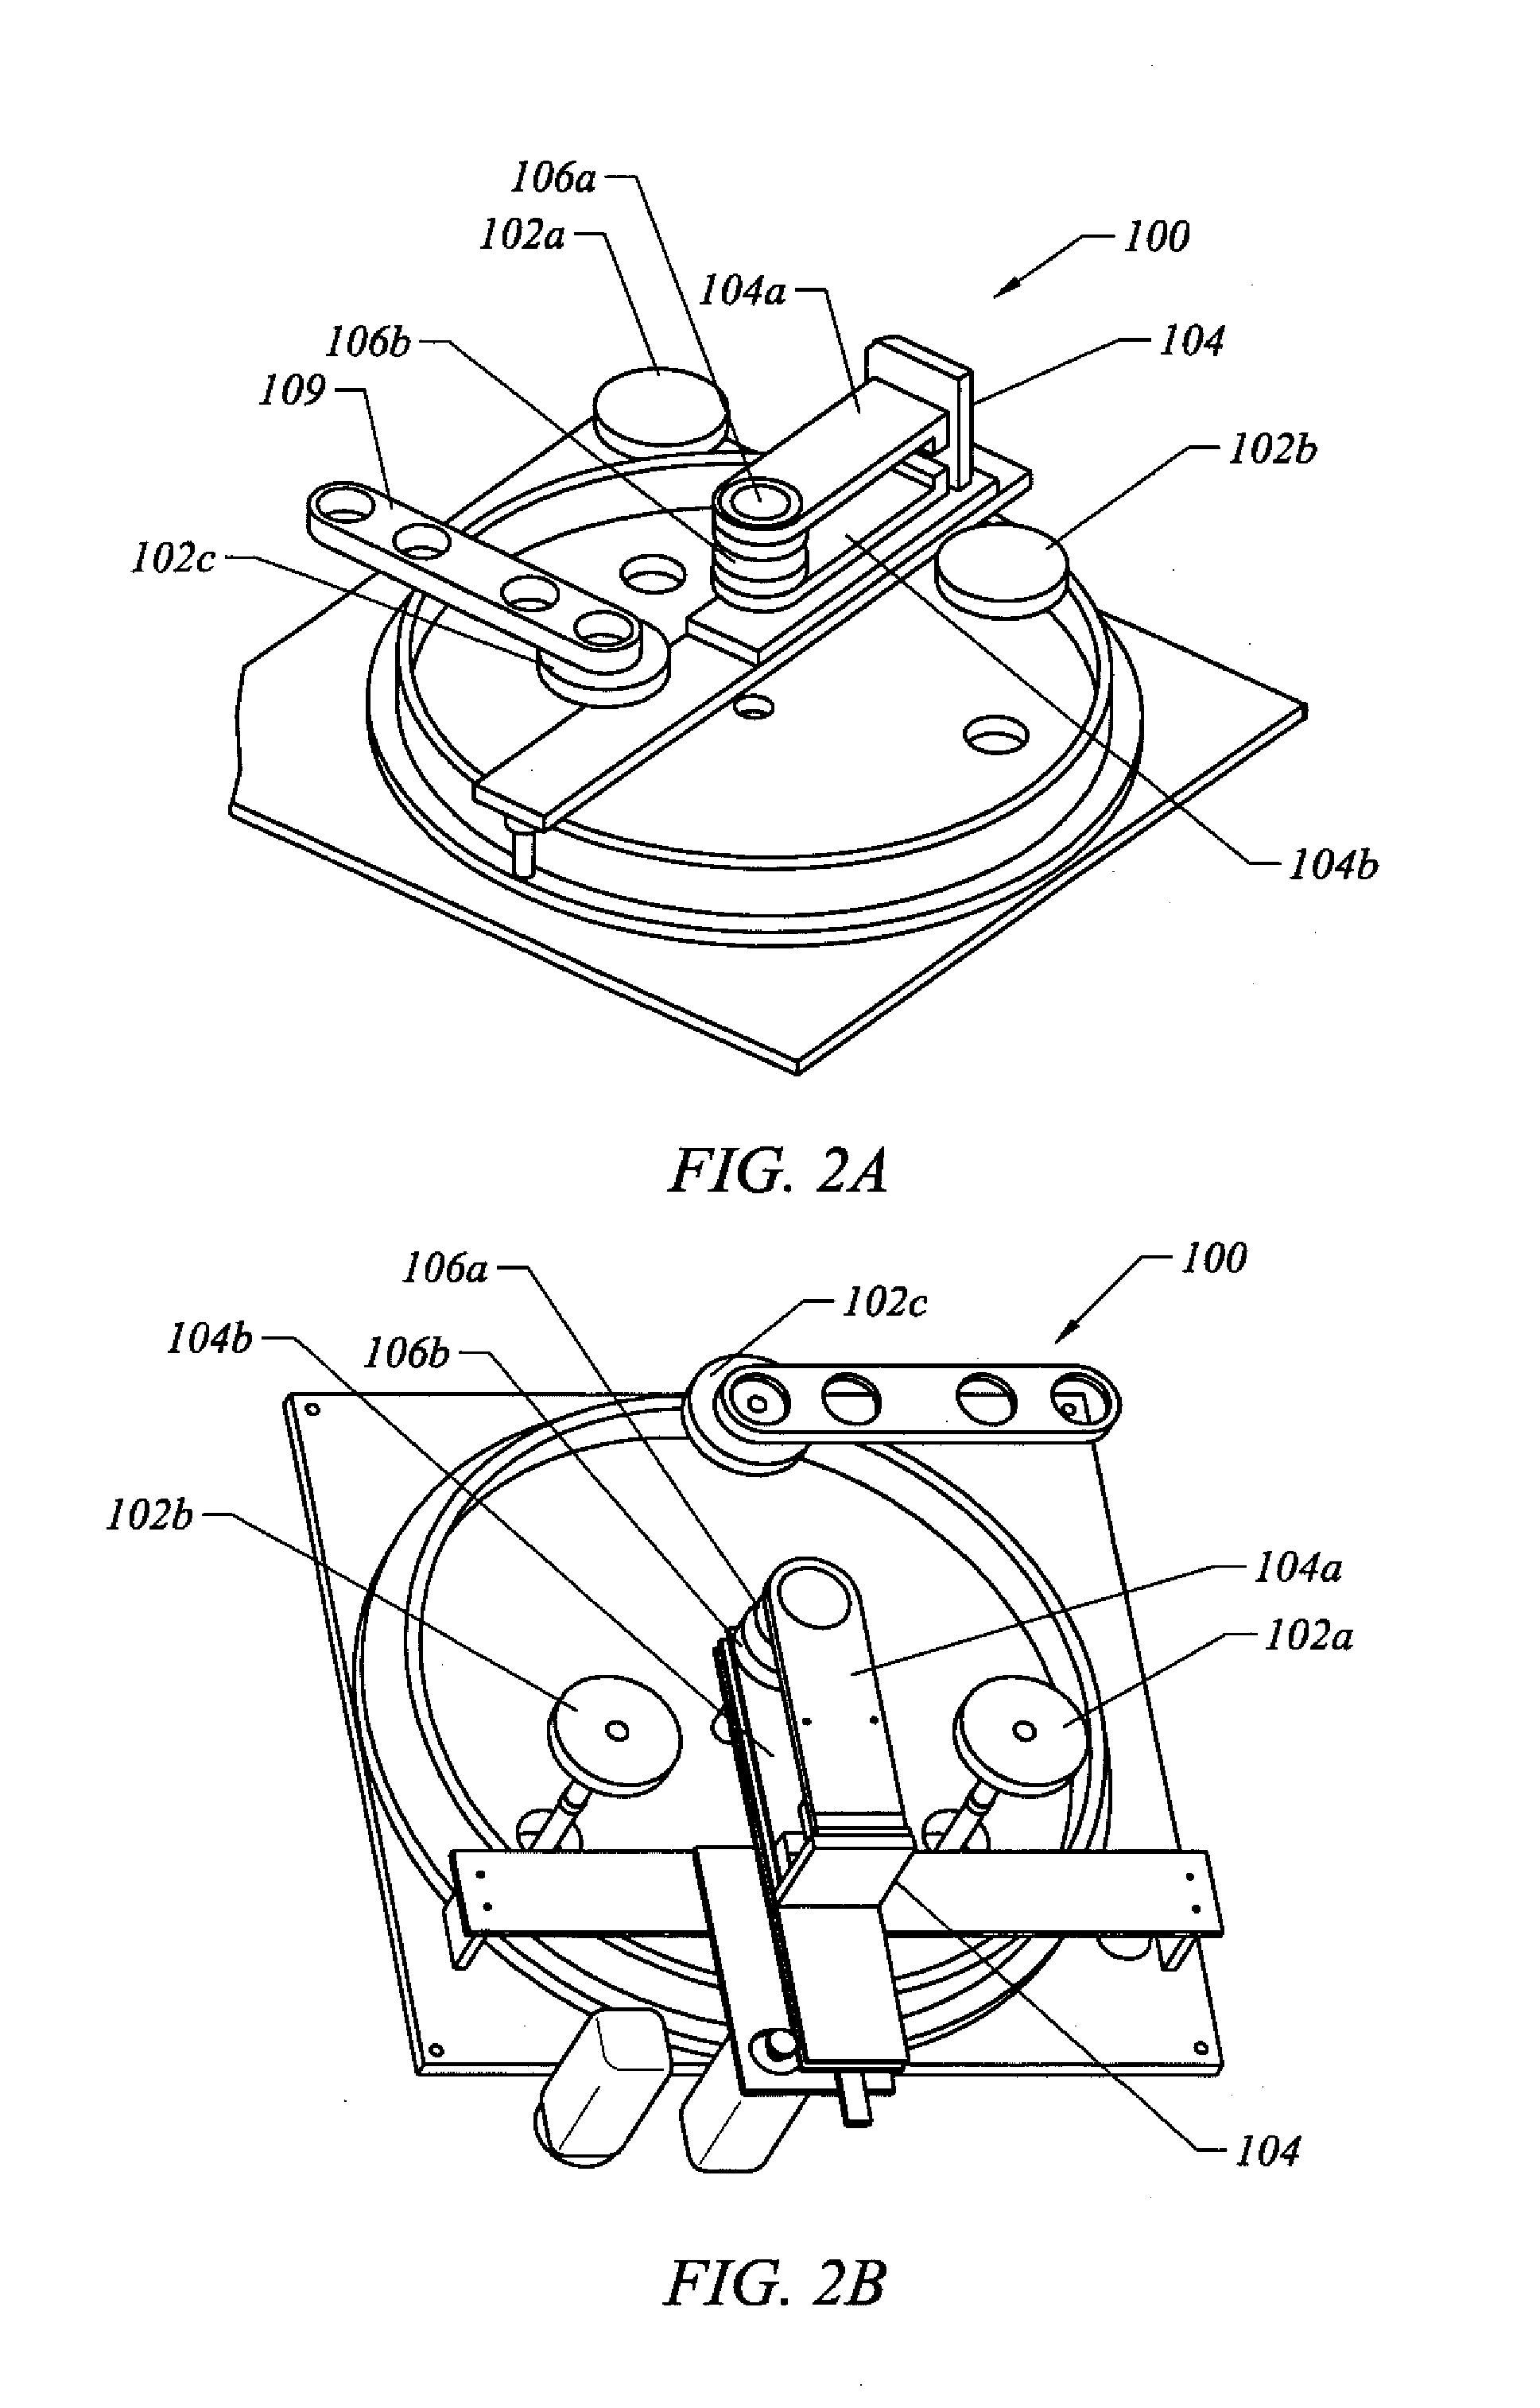 Methods for drying semiconductor wafer surfaces using a plurality of inlets and outlets held in close proximity to the wafer surfaces